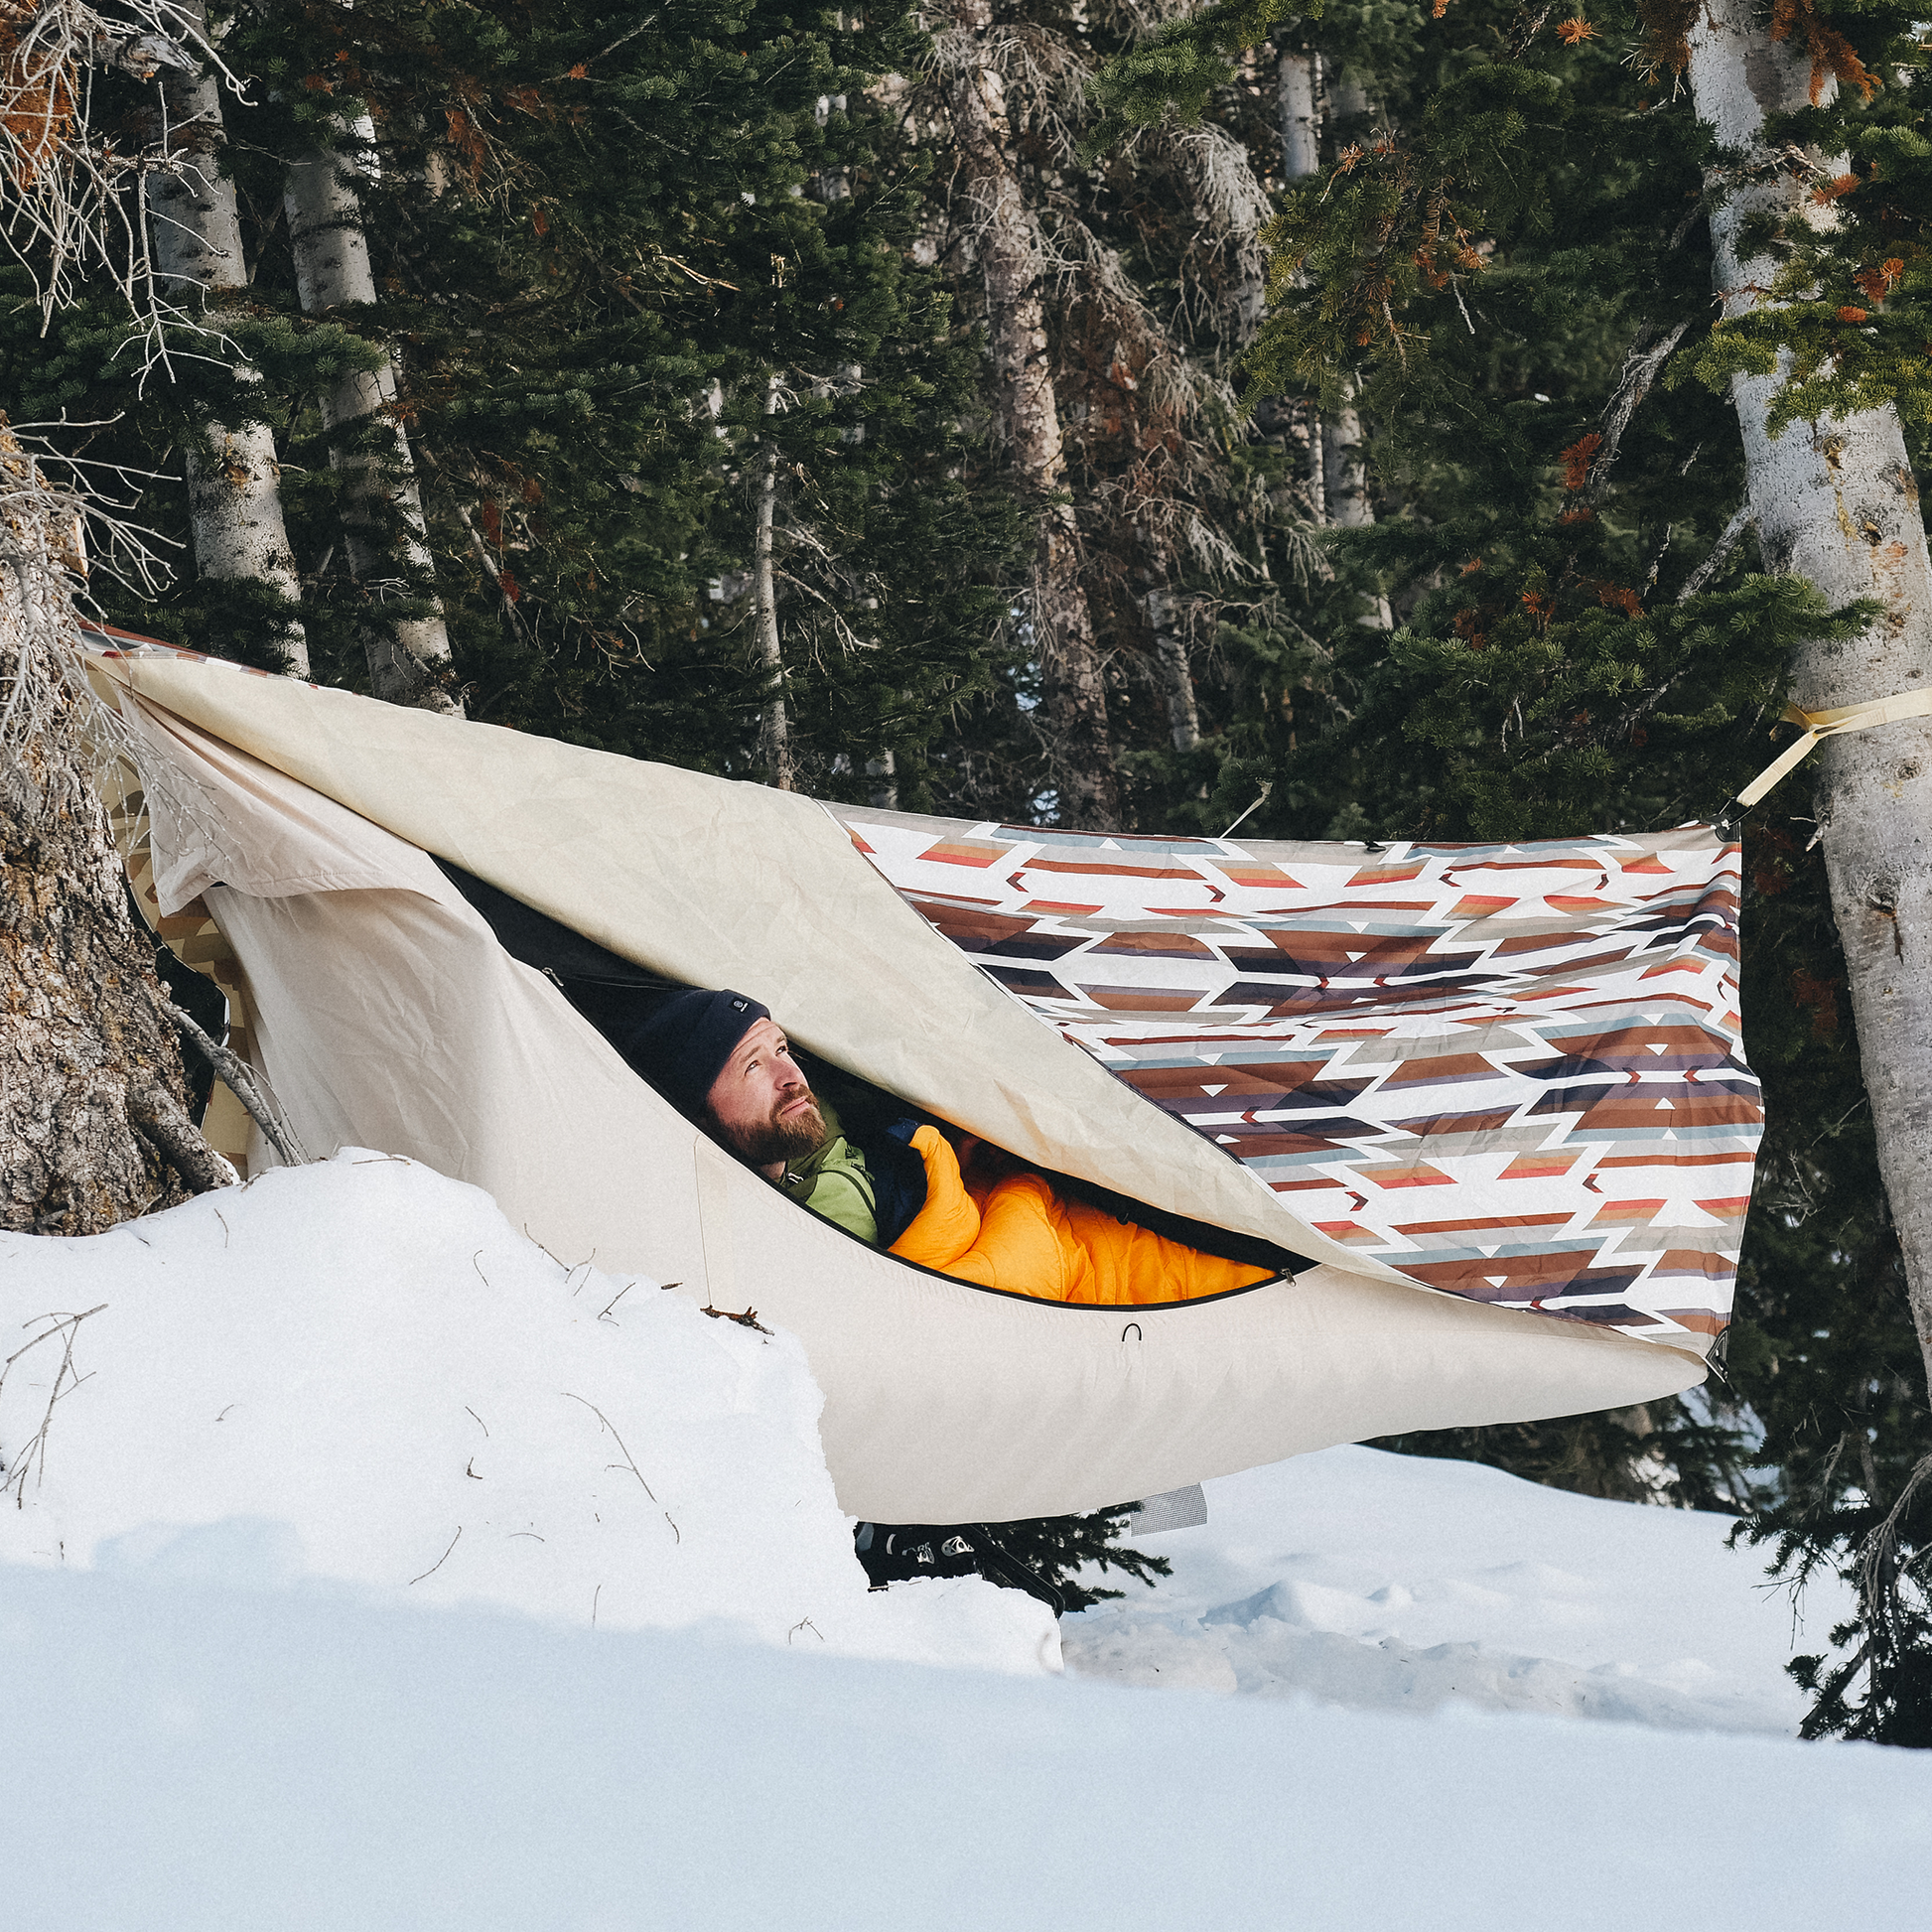 Man camping in winter in a hammock tent